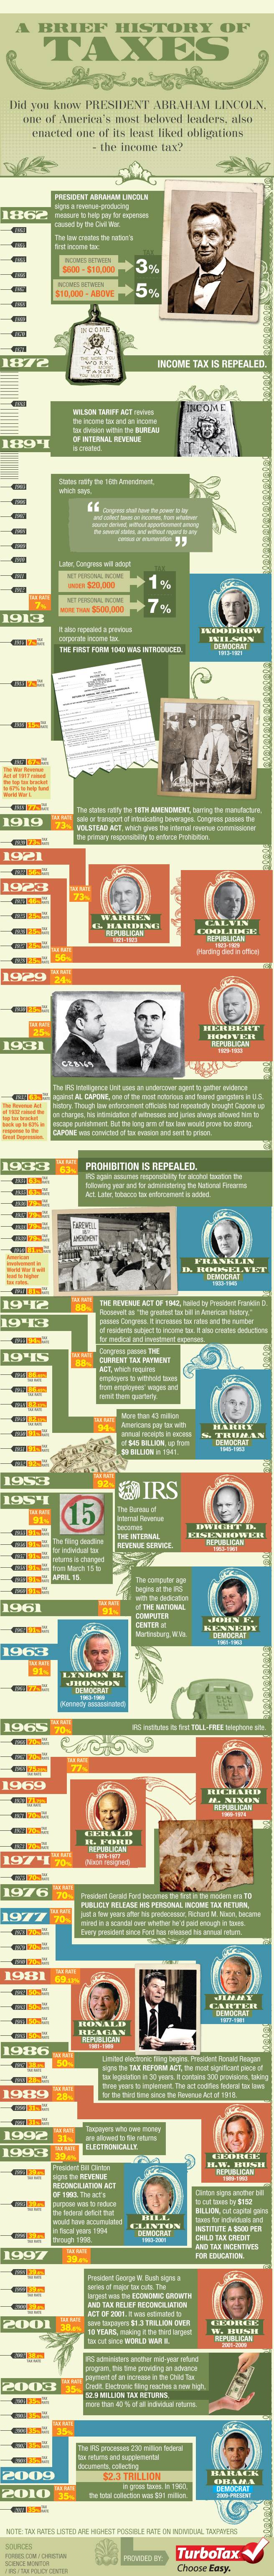 abraham-lincoln-history-of-income-tax-infographic-2013